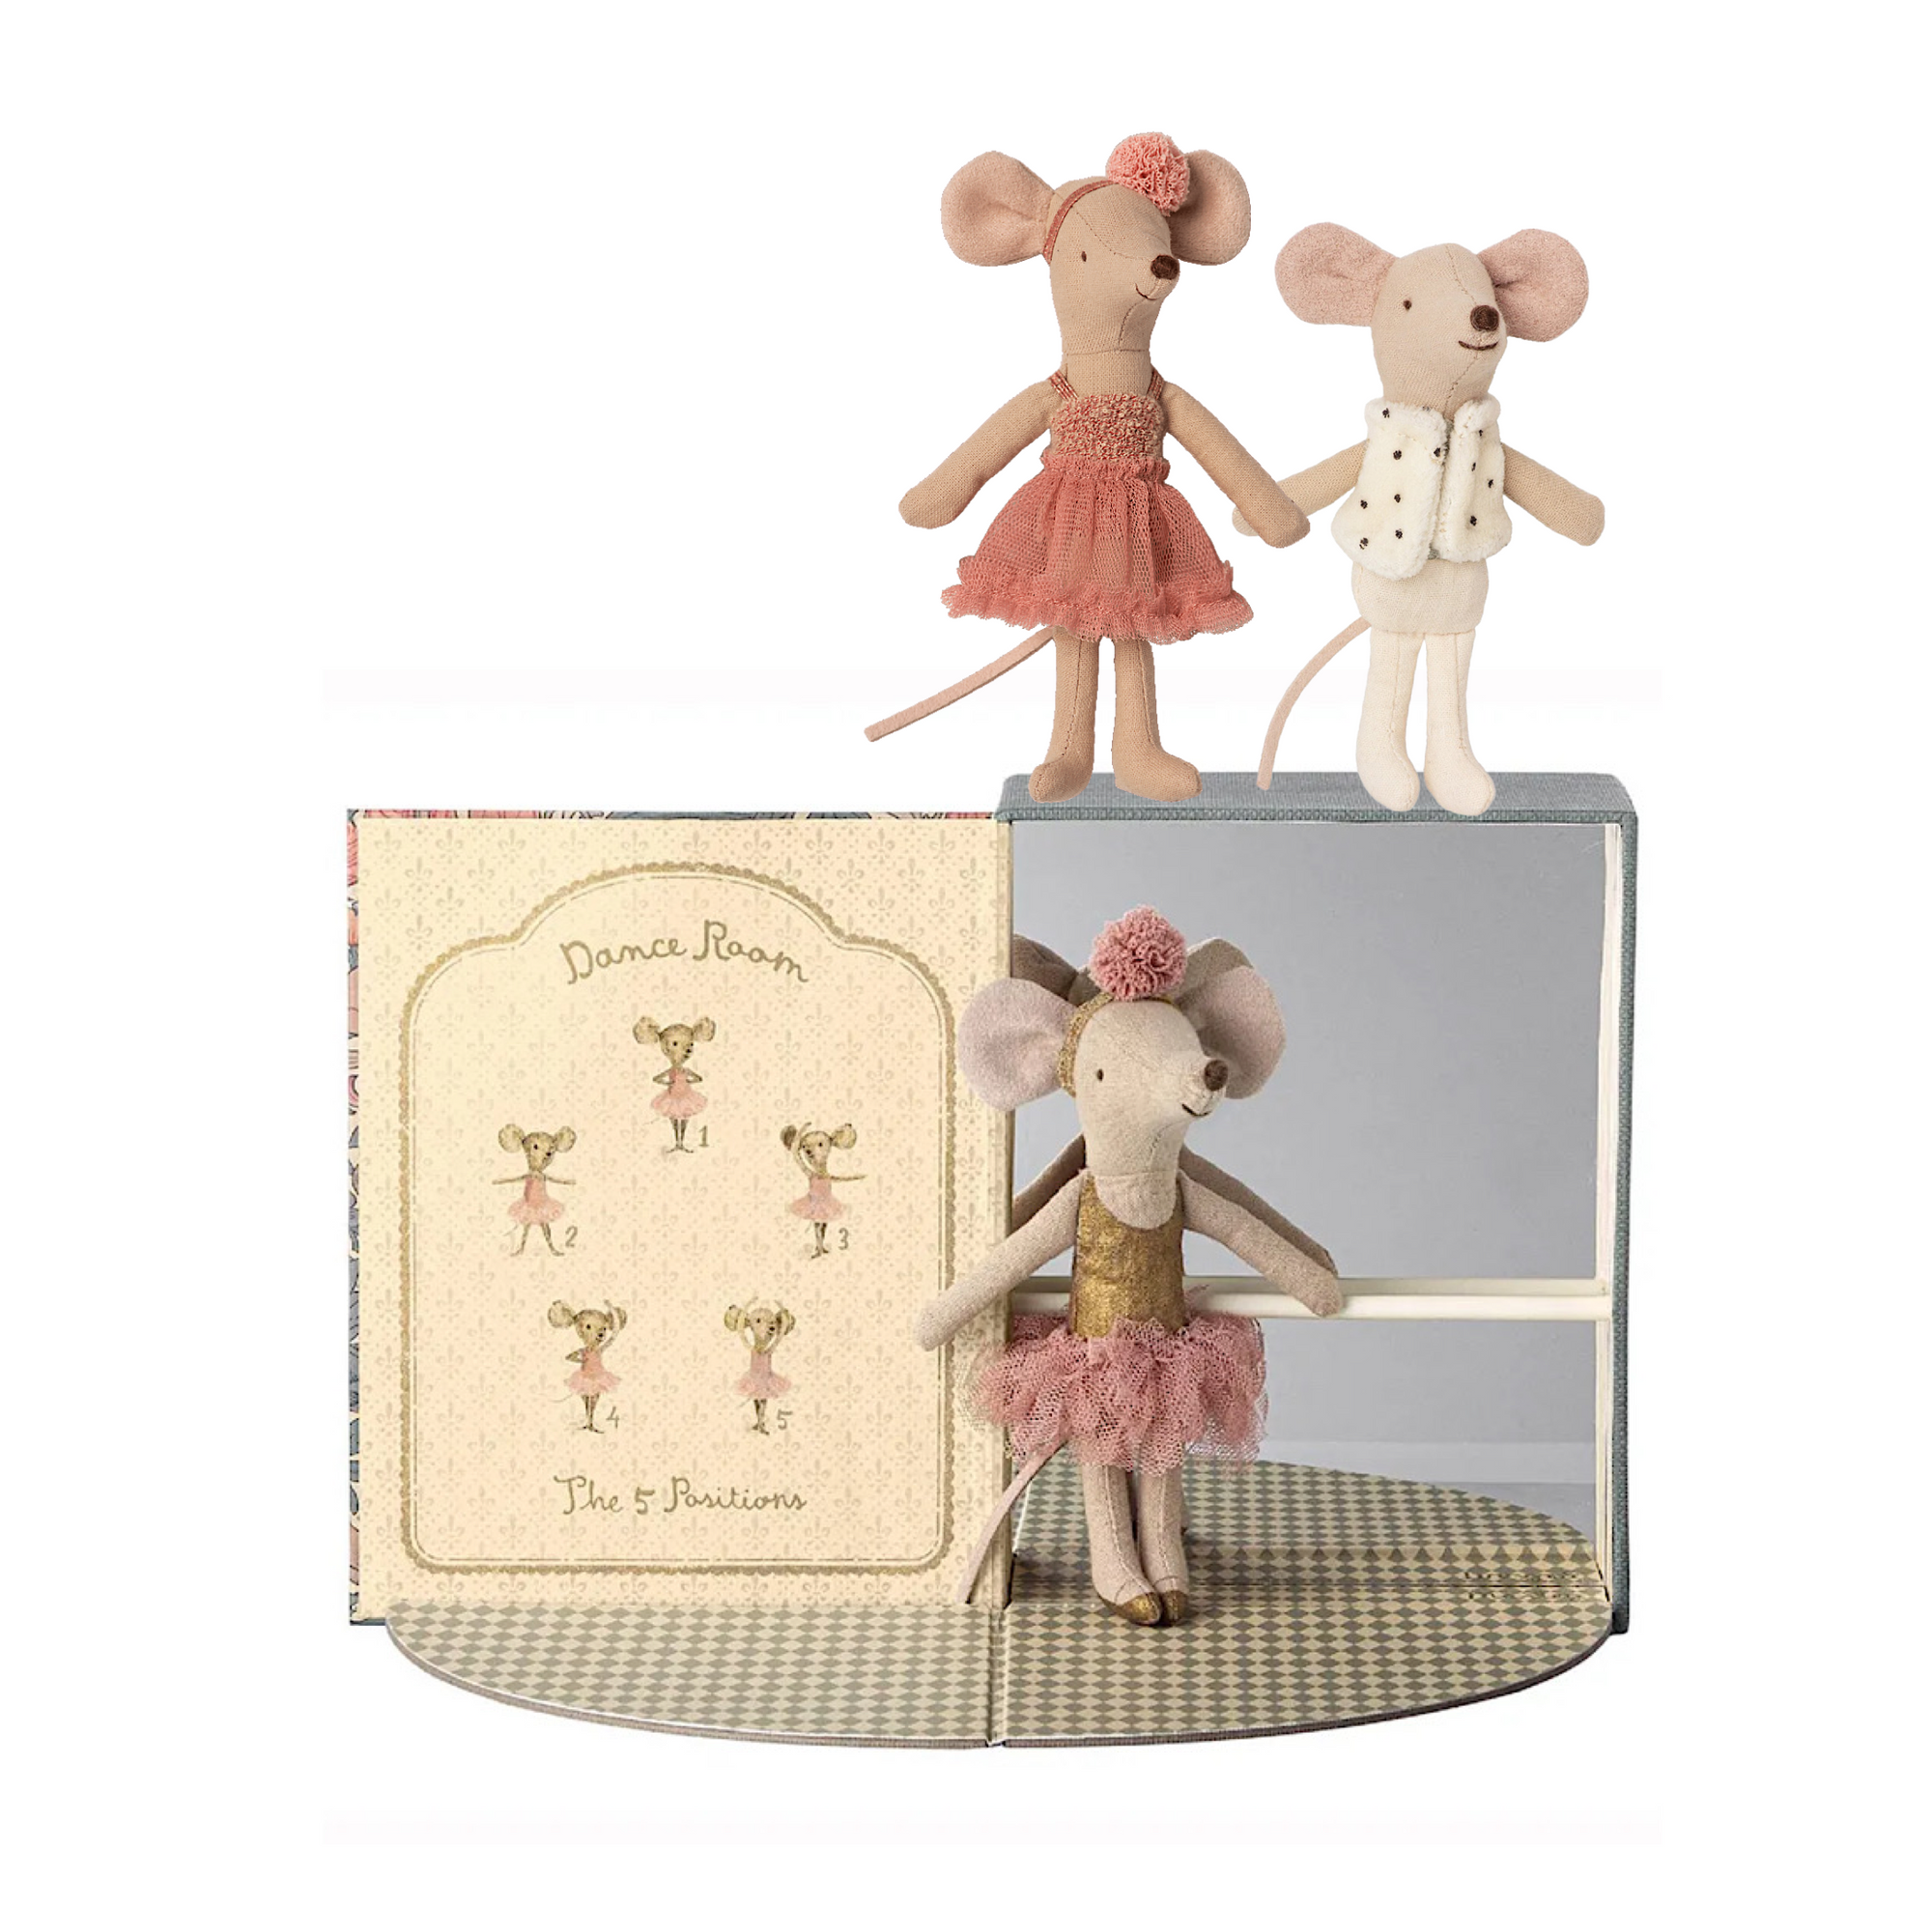 Maileg Little Brother Dancer Mouse in Matchbox